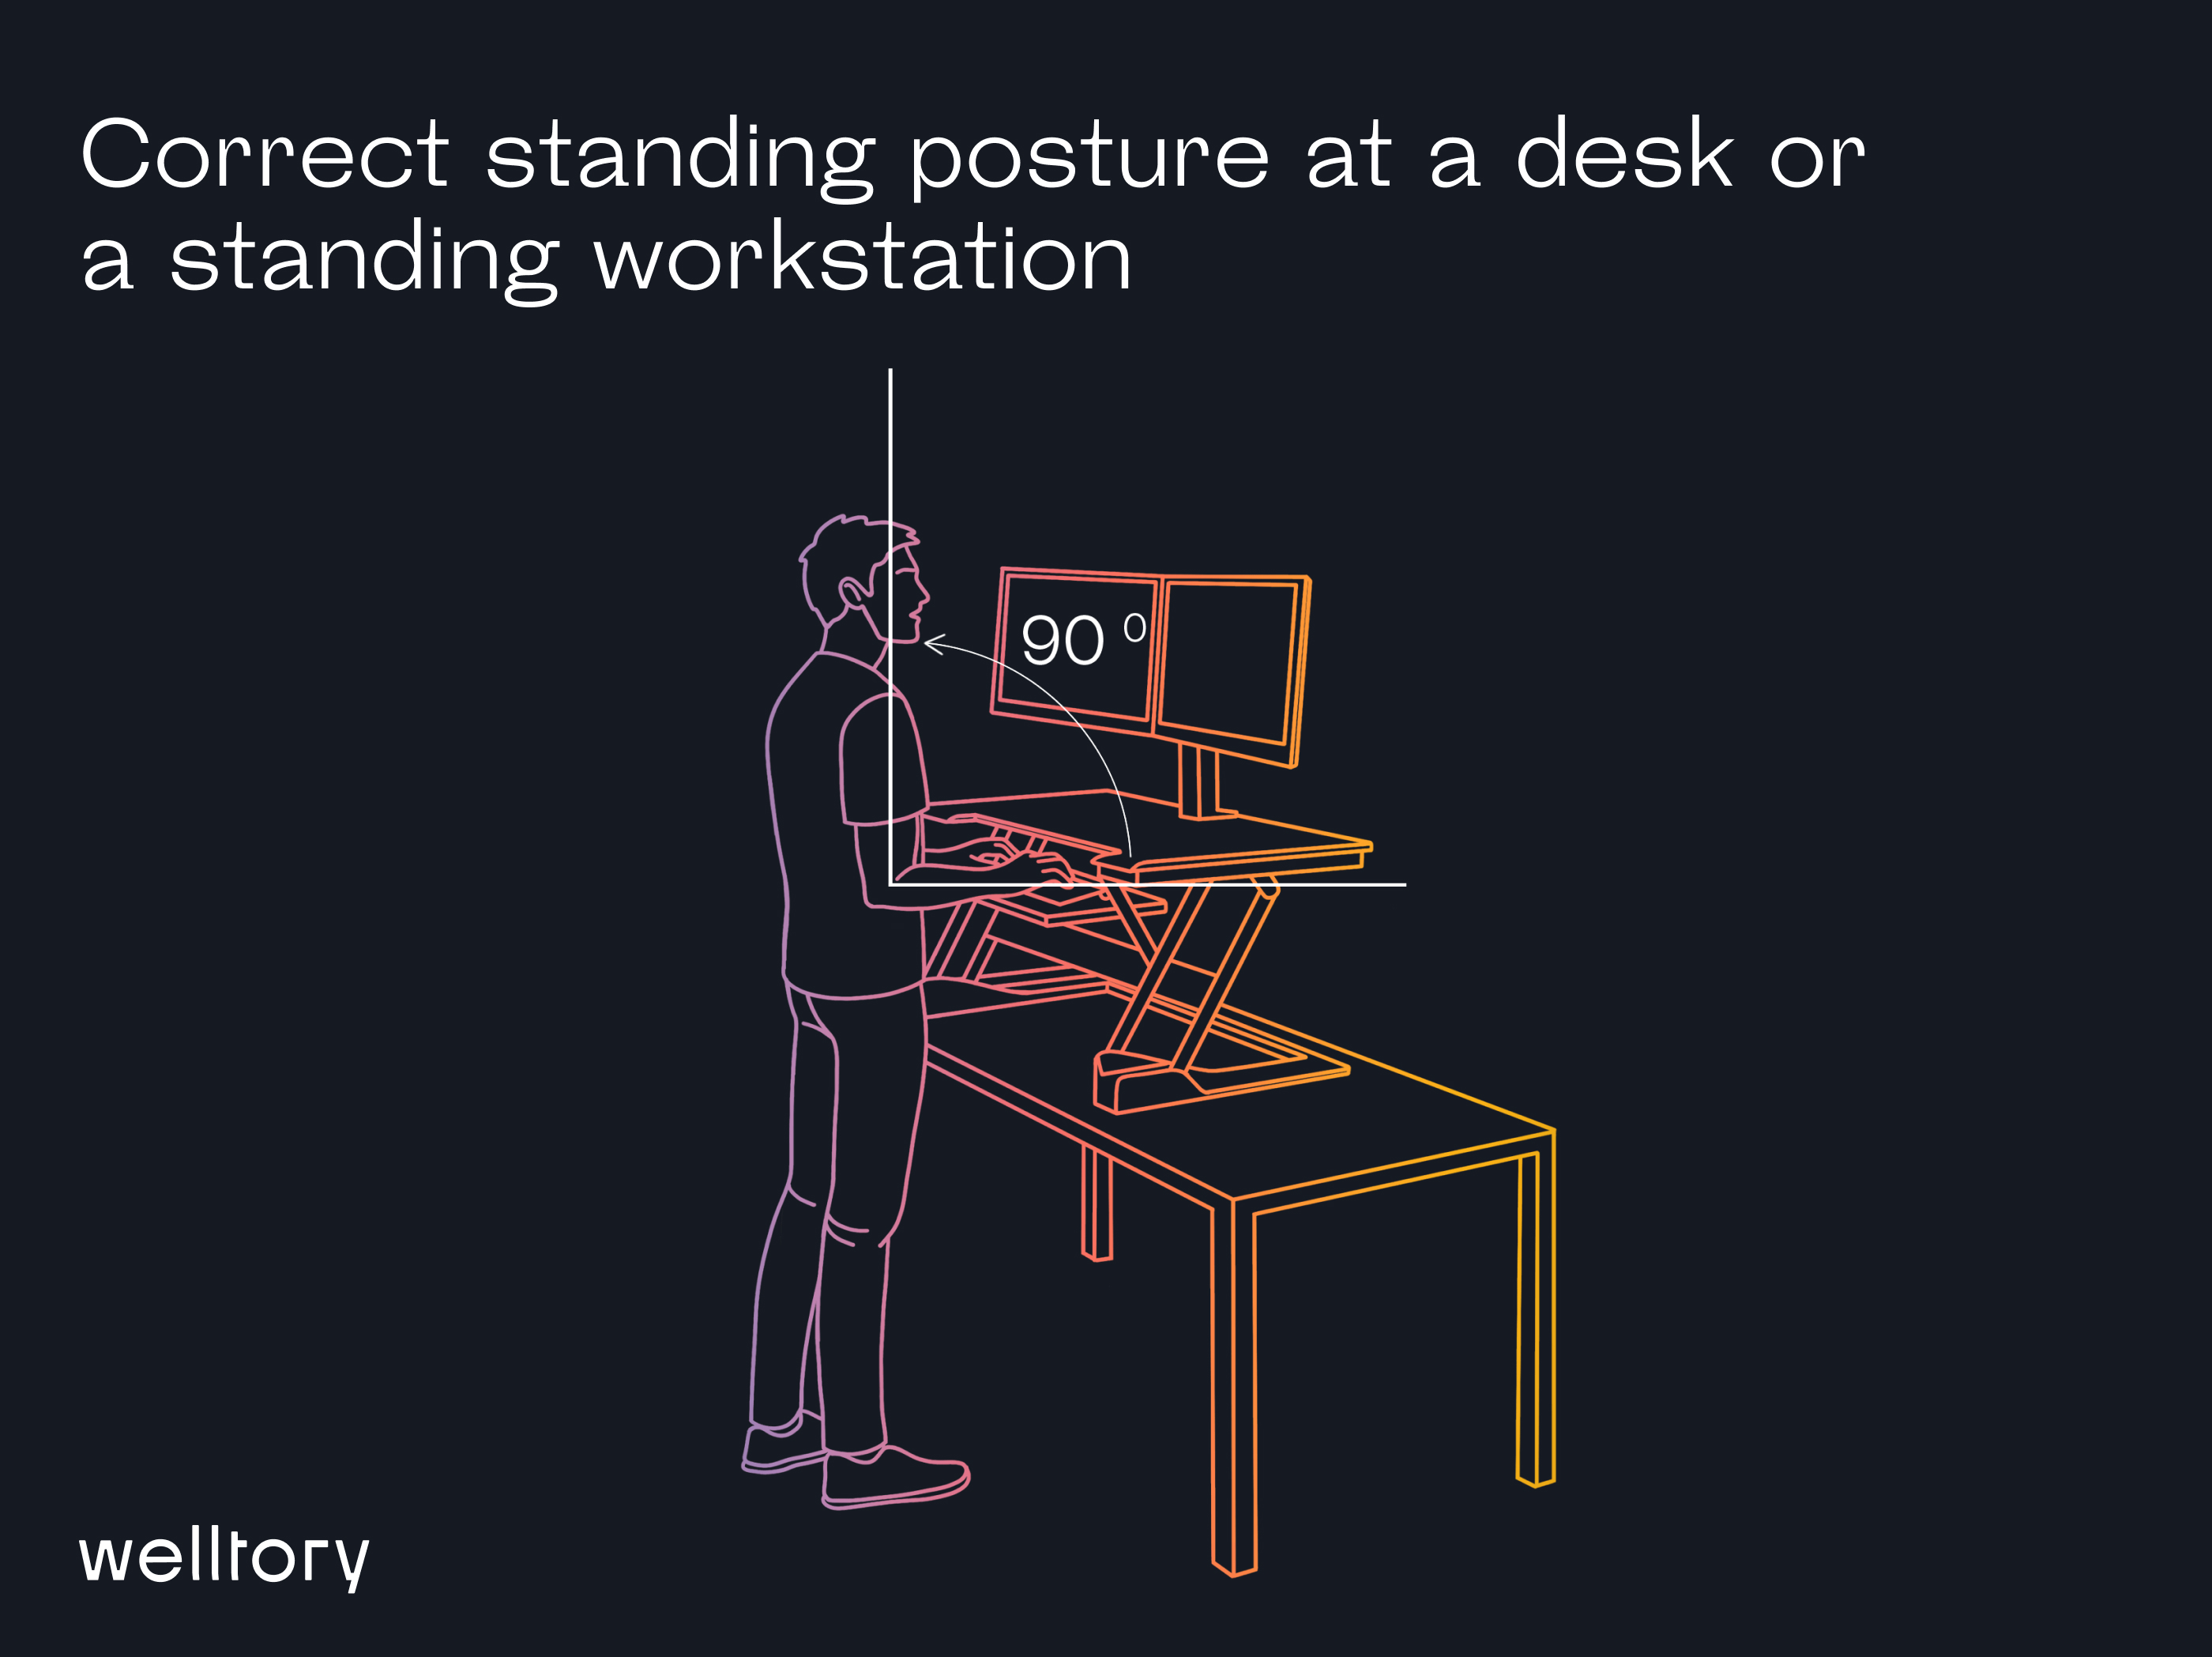 Correct standing posture at a desk or a standing workstation